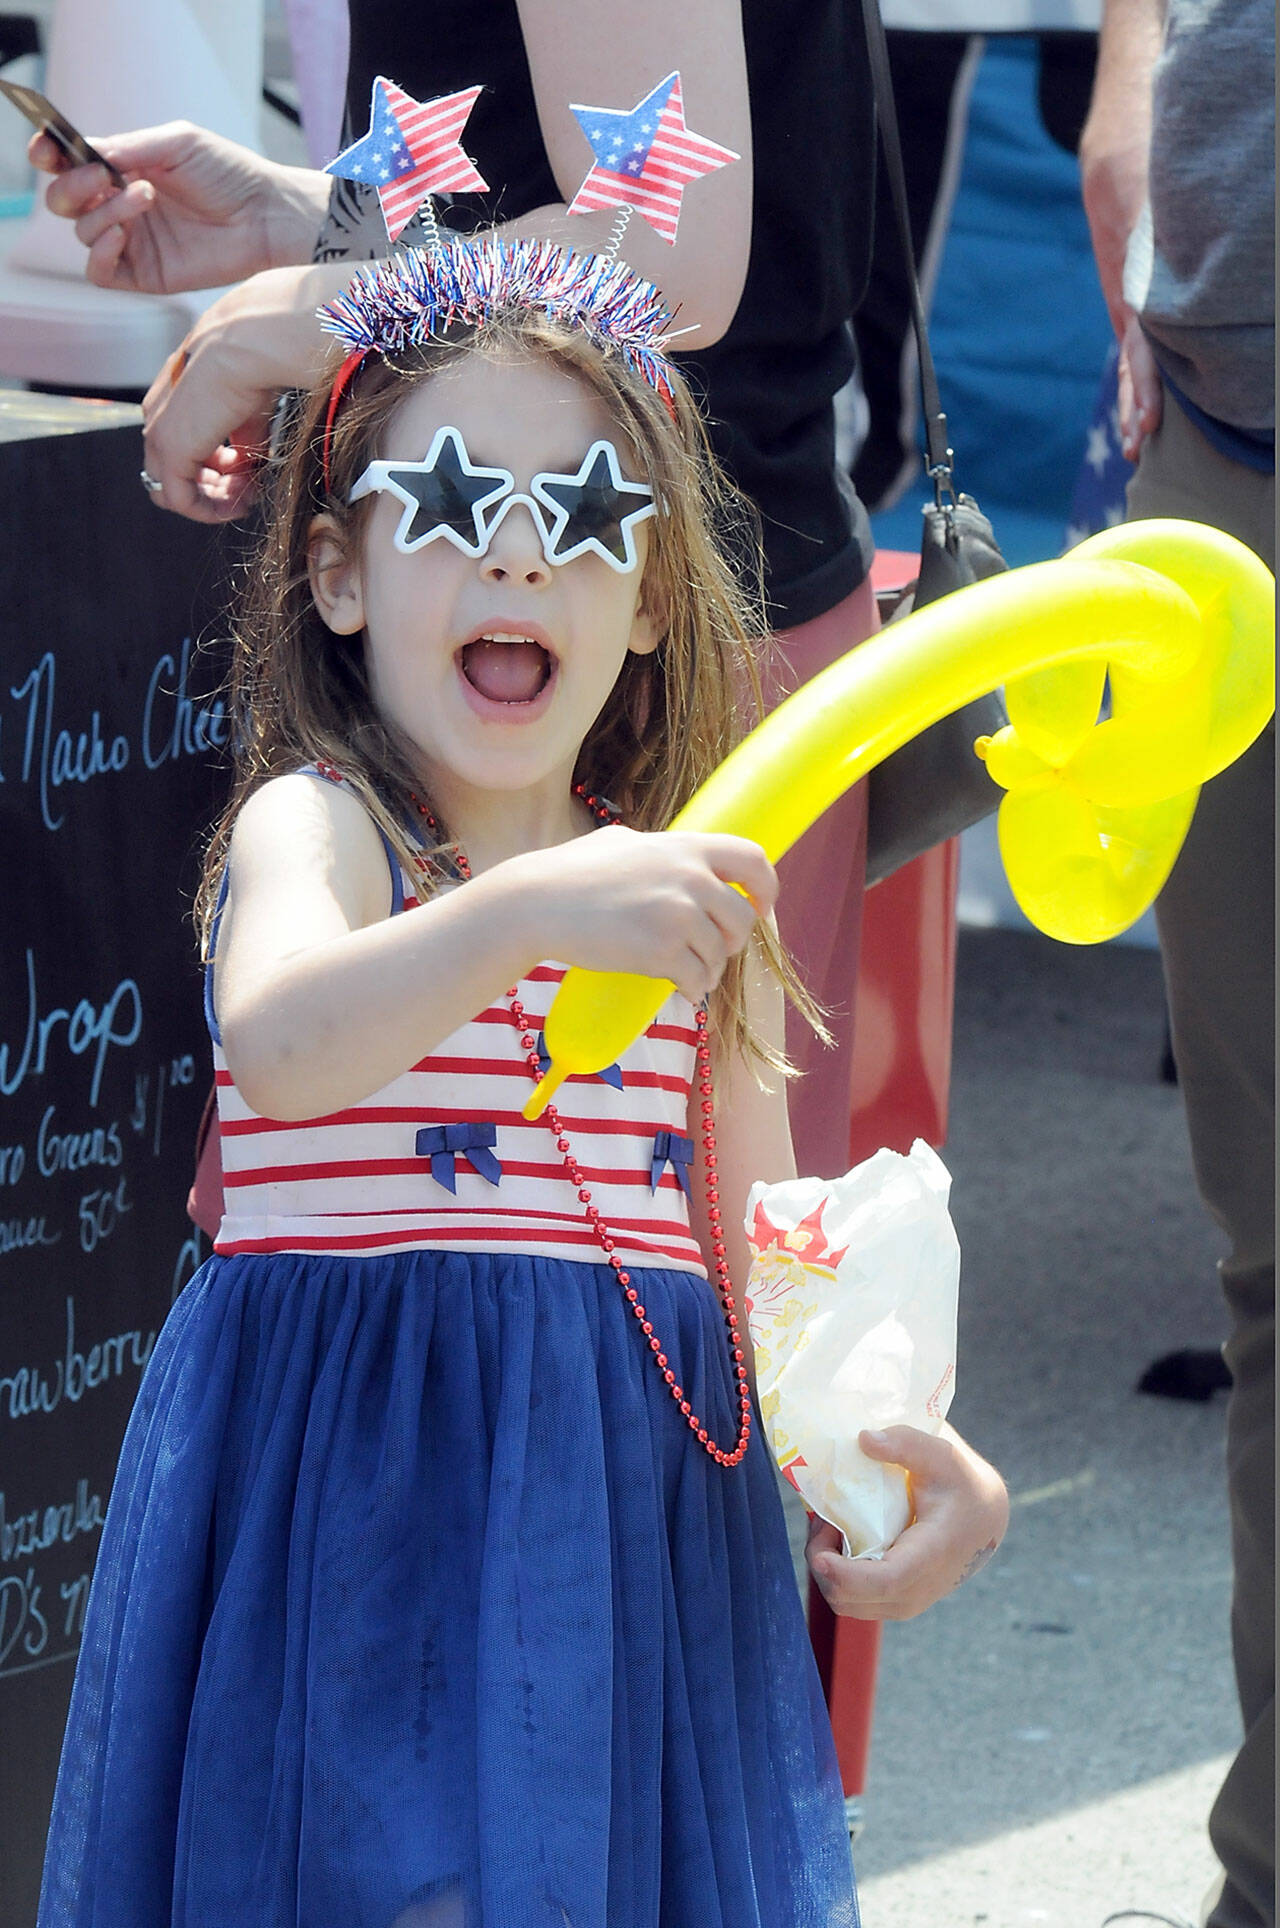 Riley Lohman, 5, of Port Angeles celebrates Independence Day at The Gateway in downtown Port Angeles on Tuesday. (Keith Thorpe/Peninsula Daily News)